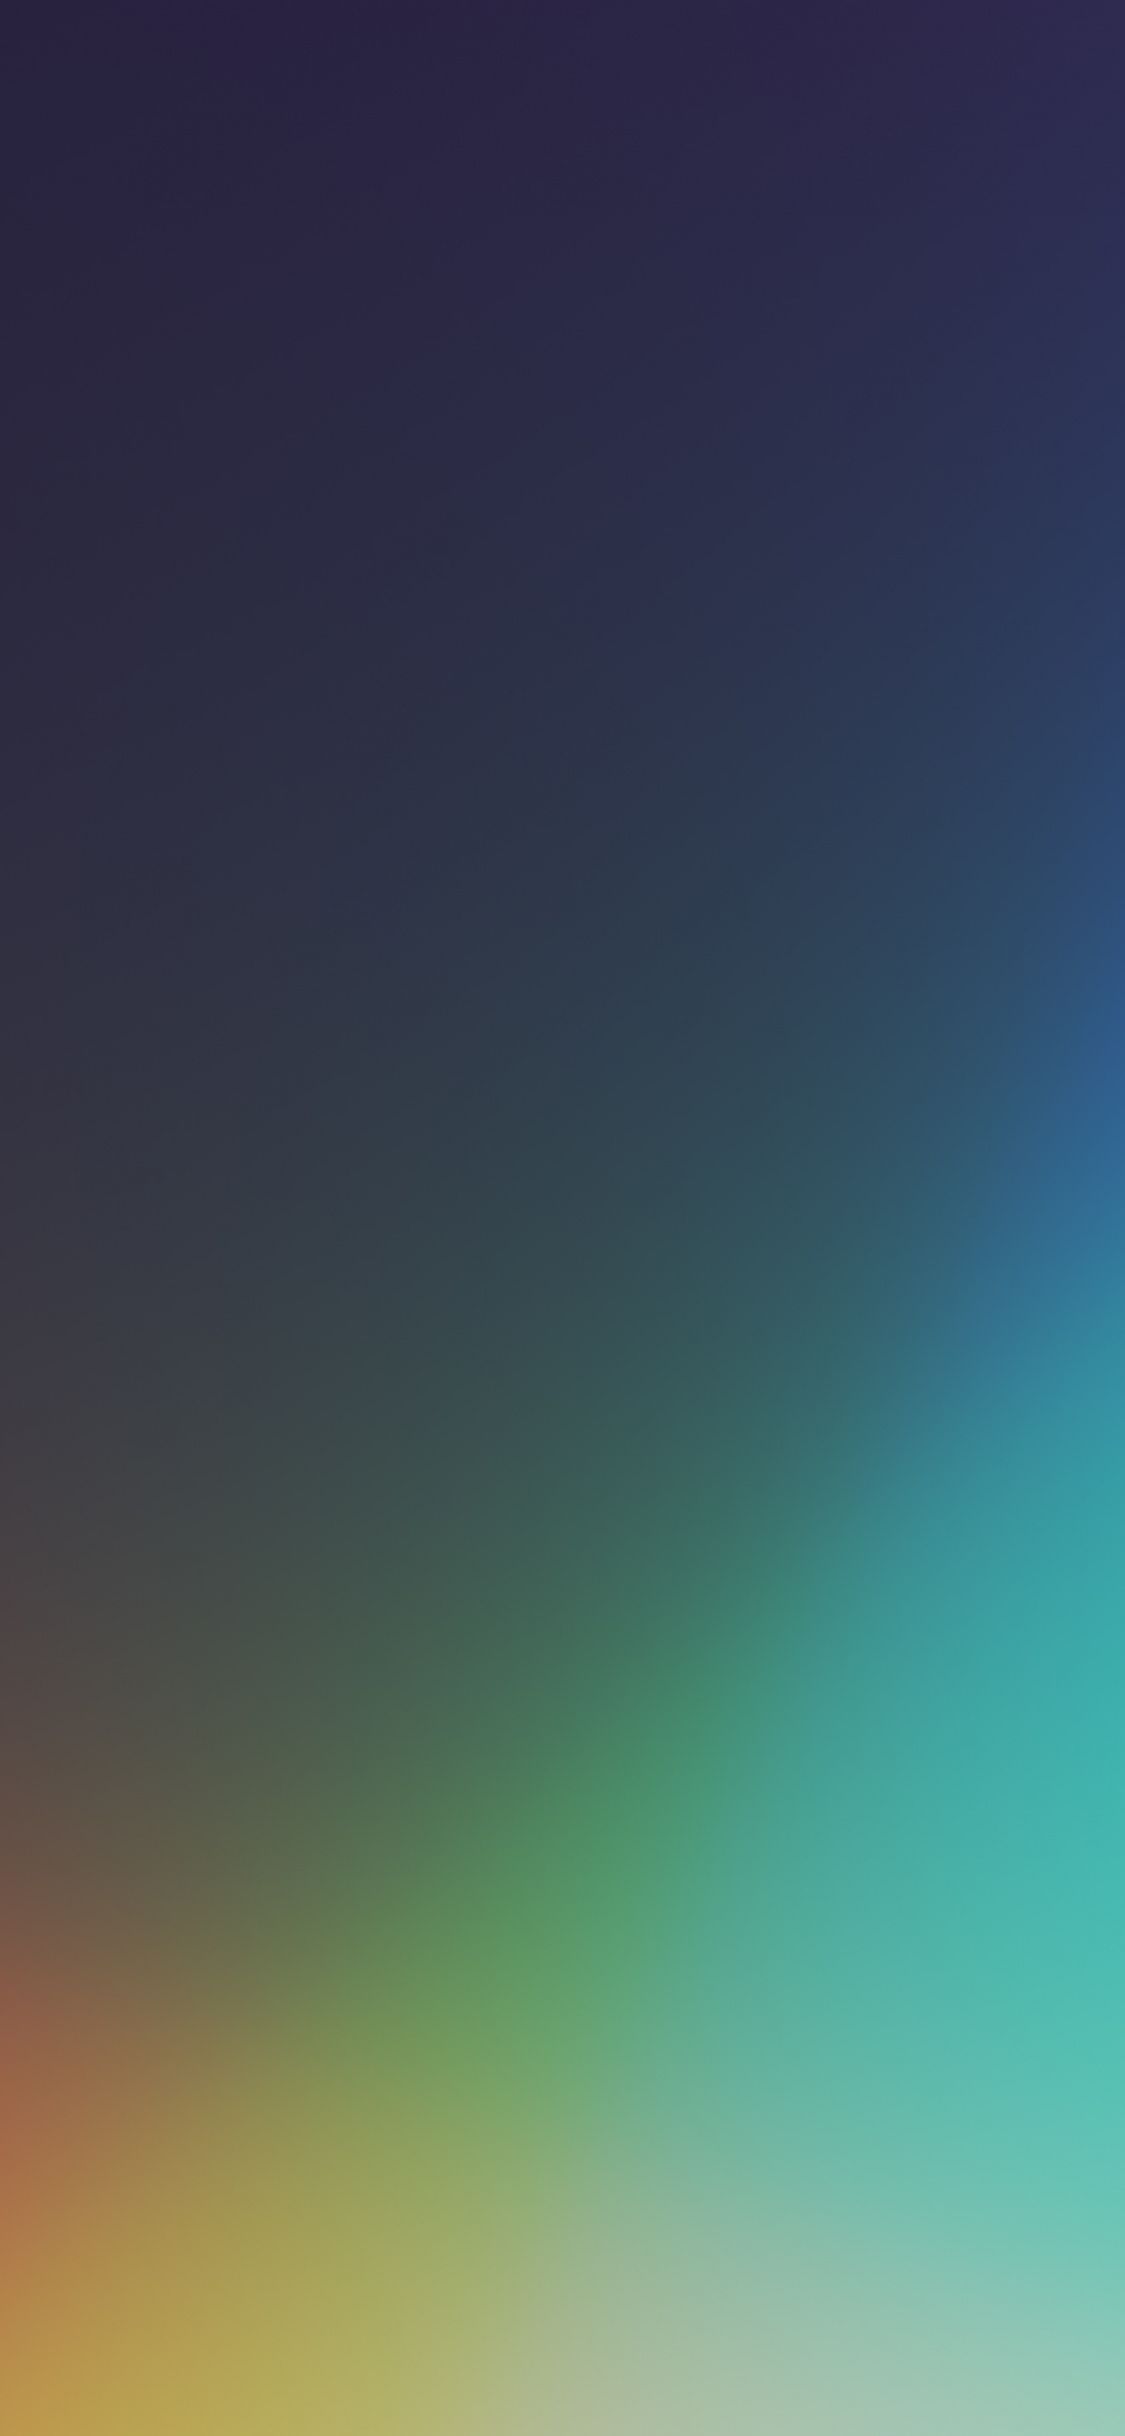 Download 1125x2436 wallpapers gradient, abstract, minimal, blur